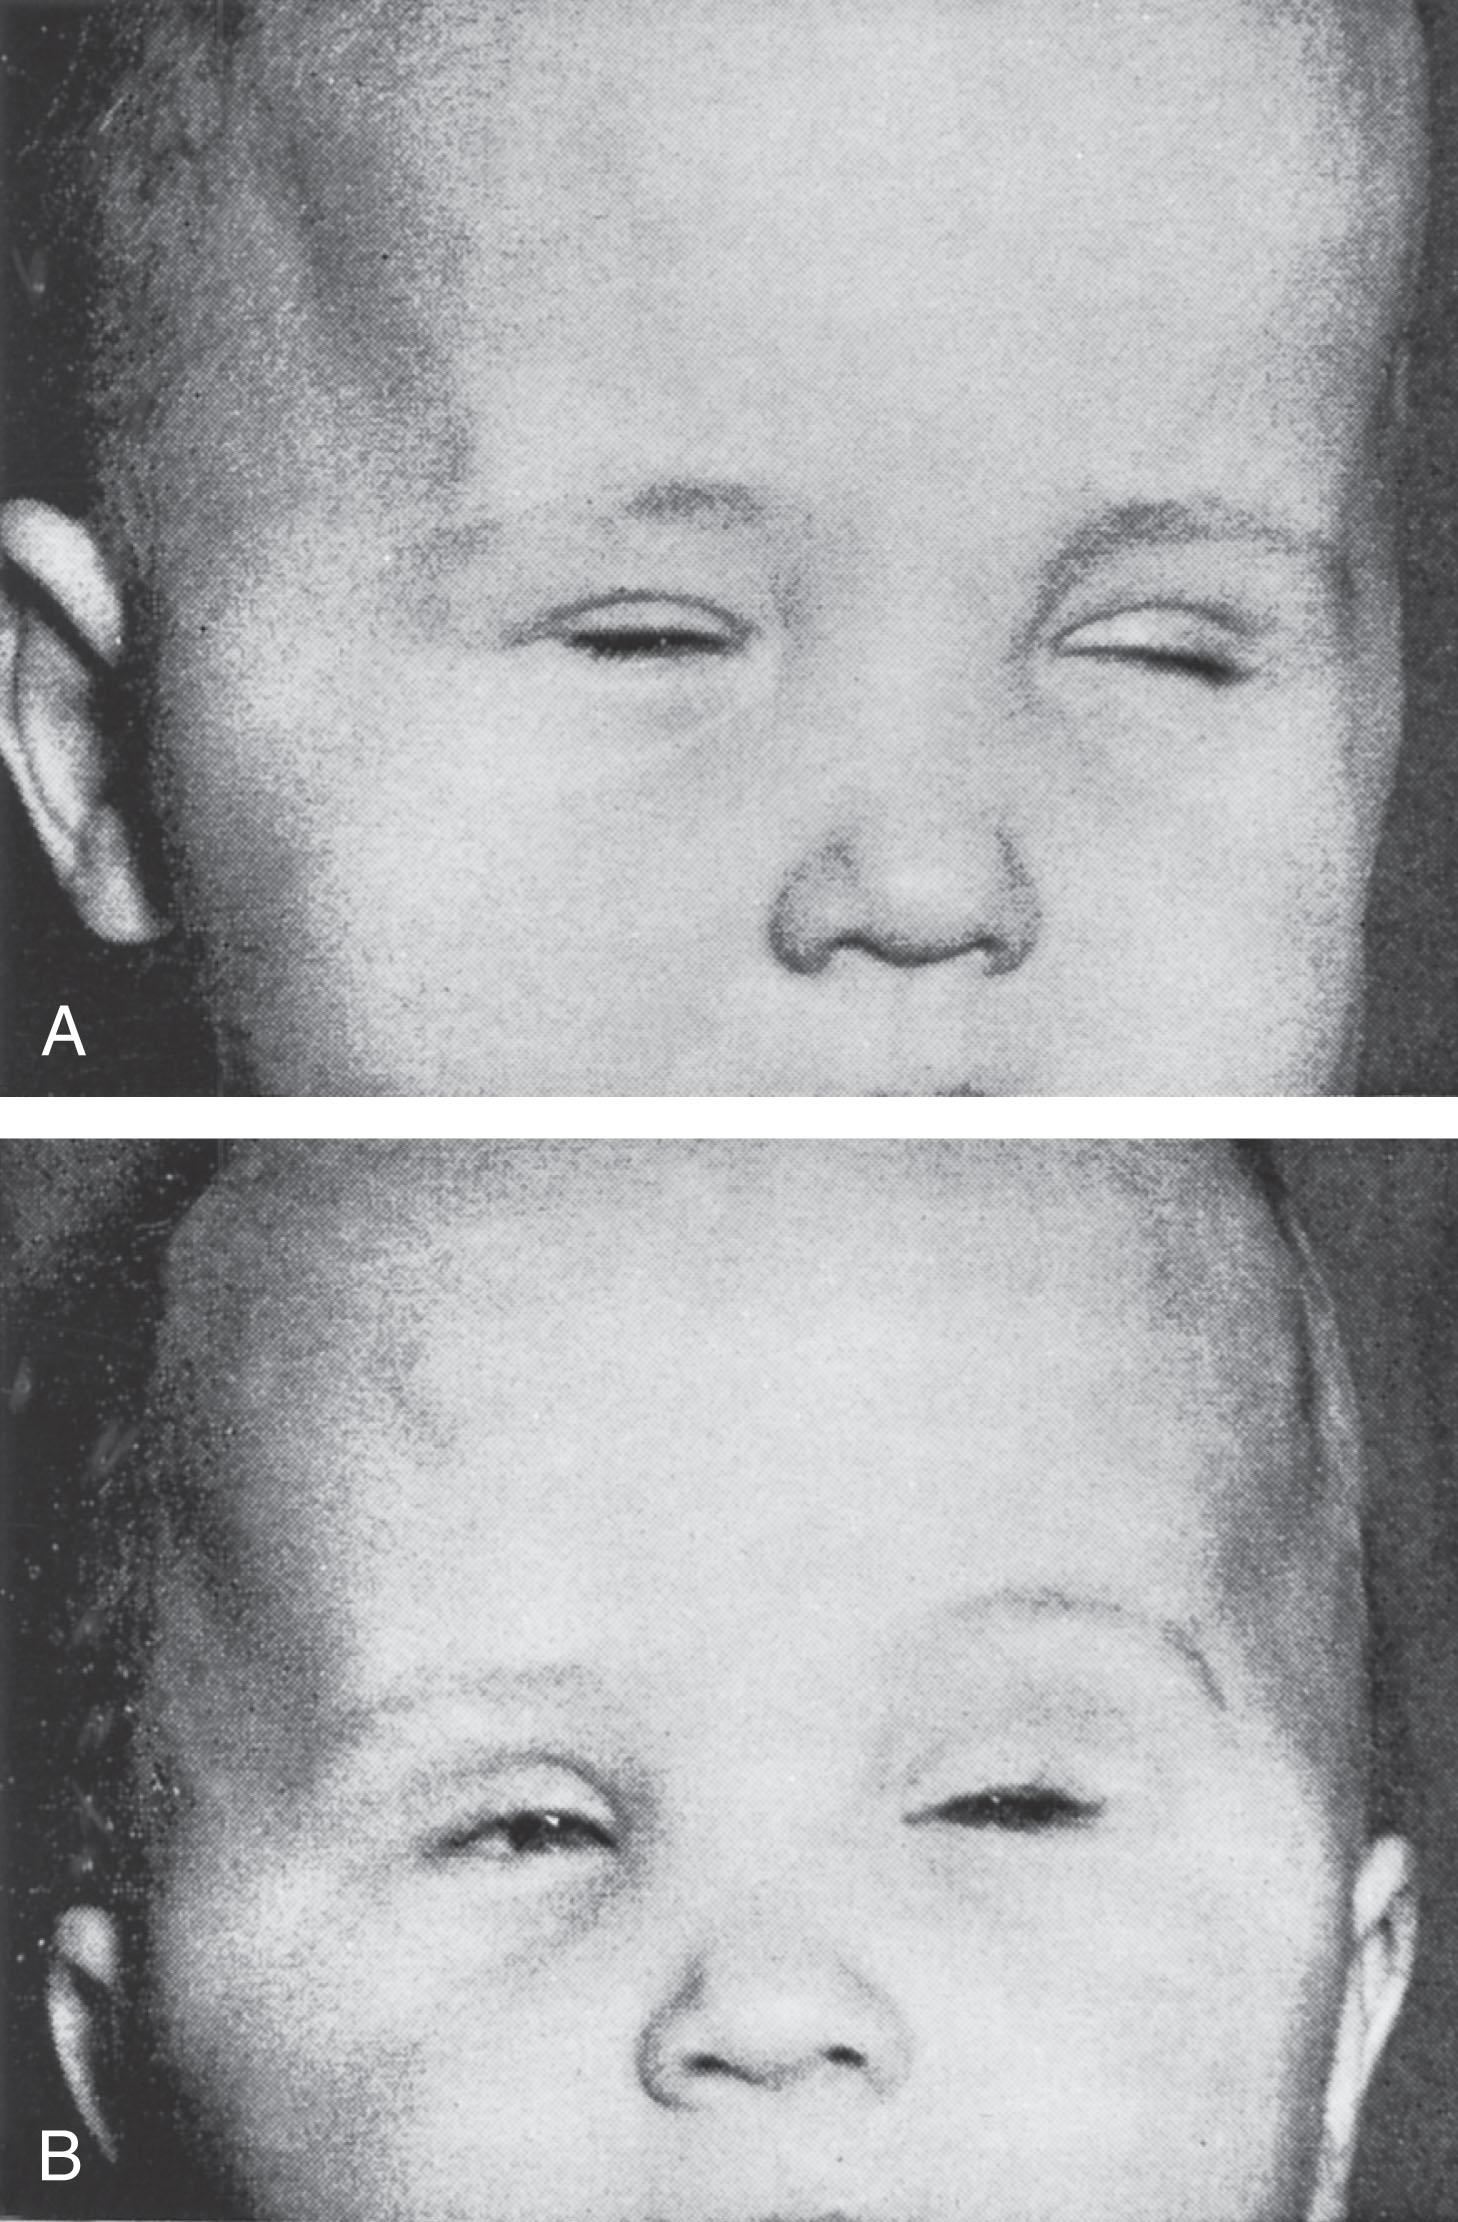 Fig. 37.5, Clinical myotonia in an 11-month-old infant . (A) Blinking was precipitated by a bright flash of light. (B) This photograph was taken approximately 15 seconds later. Note the persisting partial closure of the eyelids caused by myotonia of the orbicularis oculi muscles and also the temporal hollowing, suggesting atrophy.